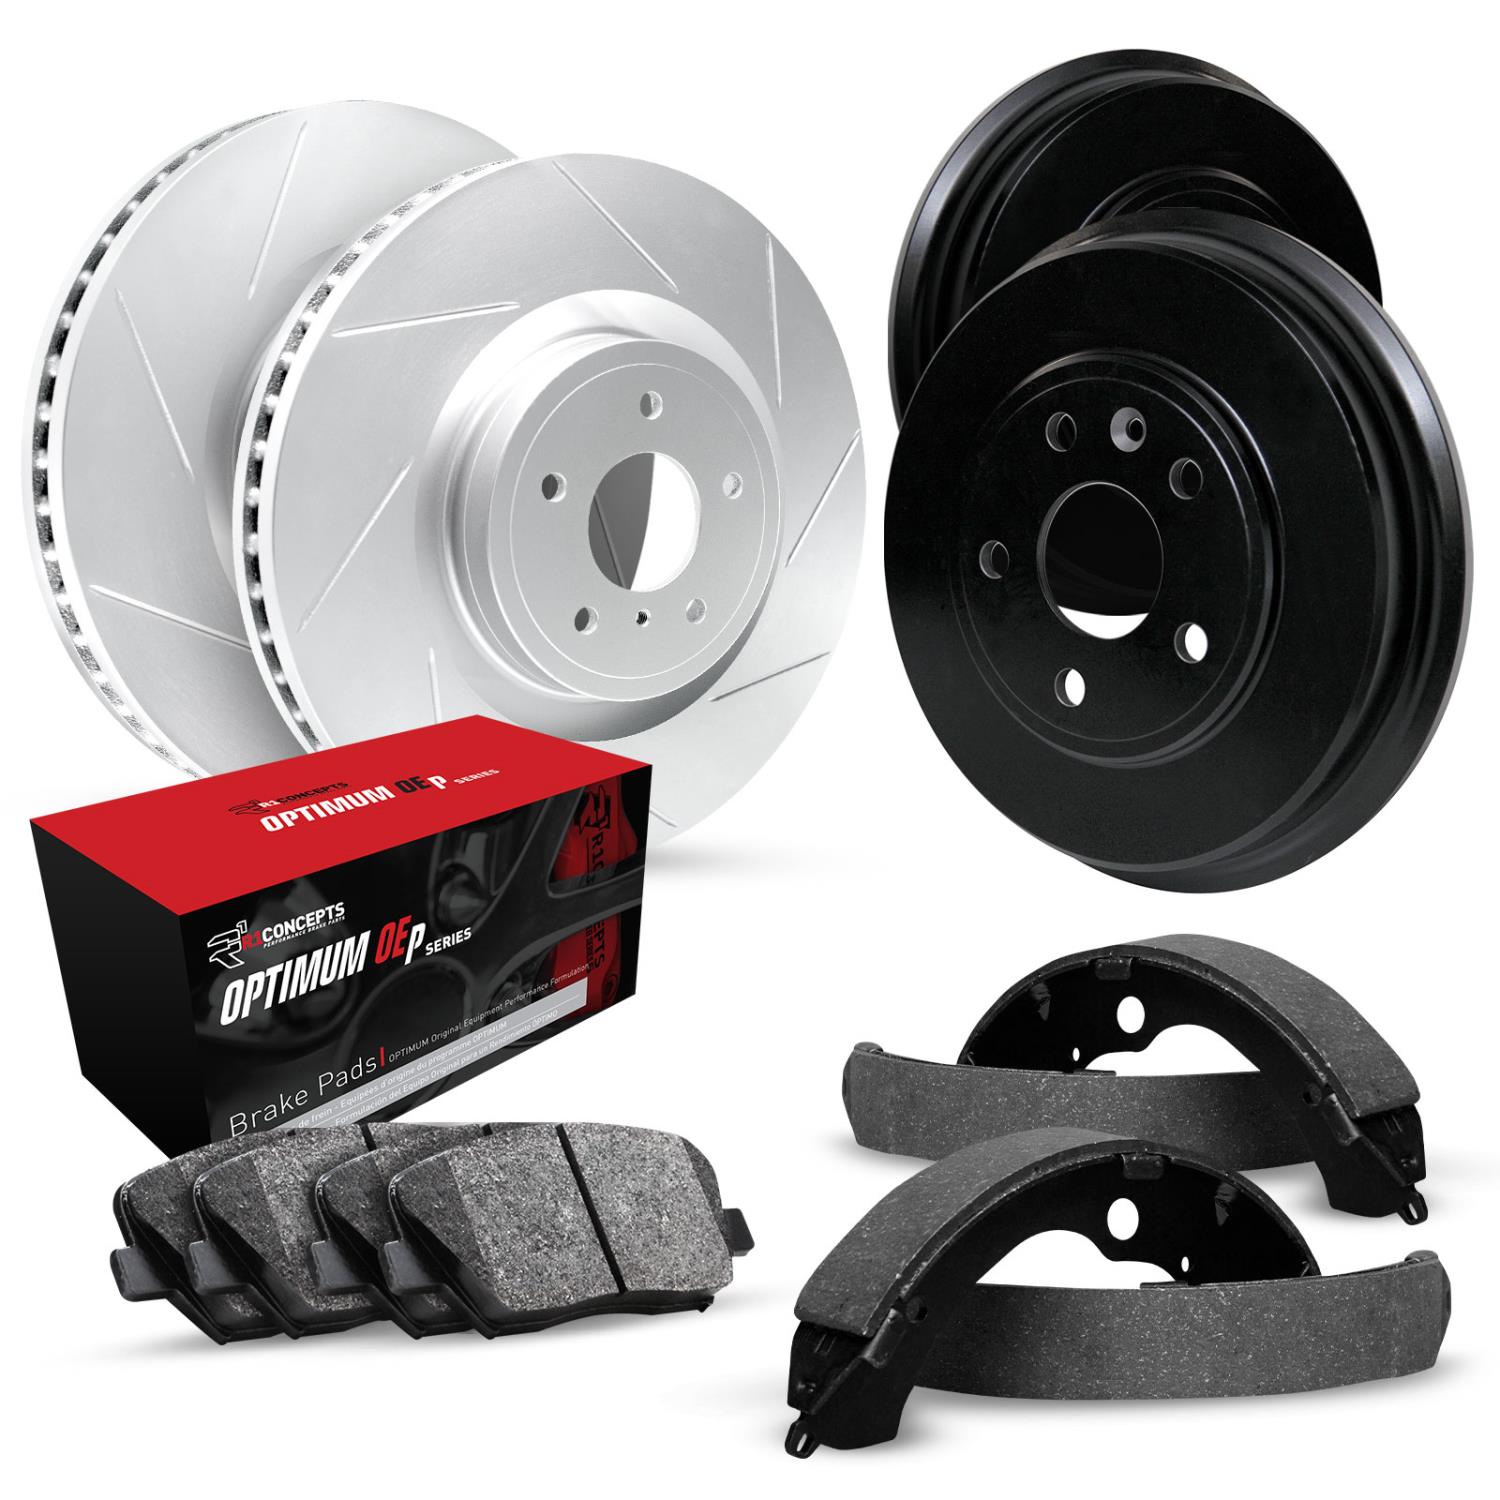 GEO-Carbon Slotted Brake Rotor & Drum Set w/Optimum OE Pads & Shoes, 1983-1994 Ford/Lincoln/Mercury/Mazda